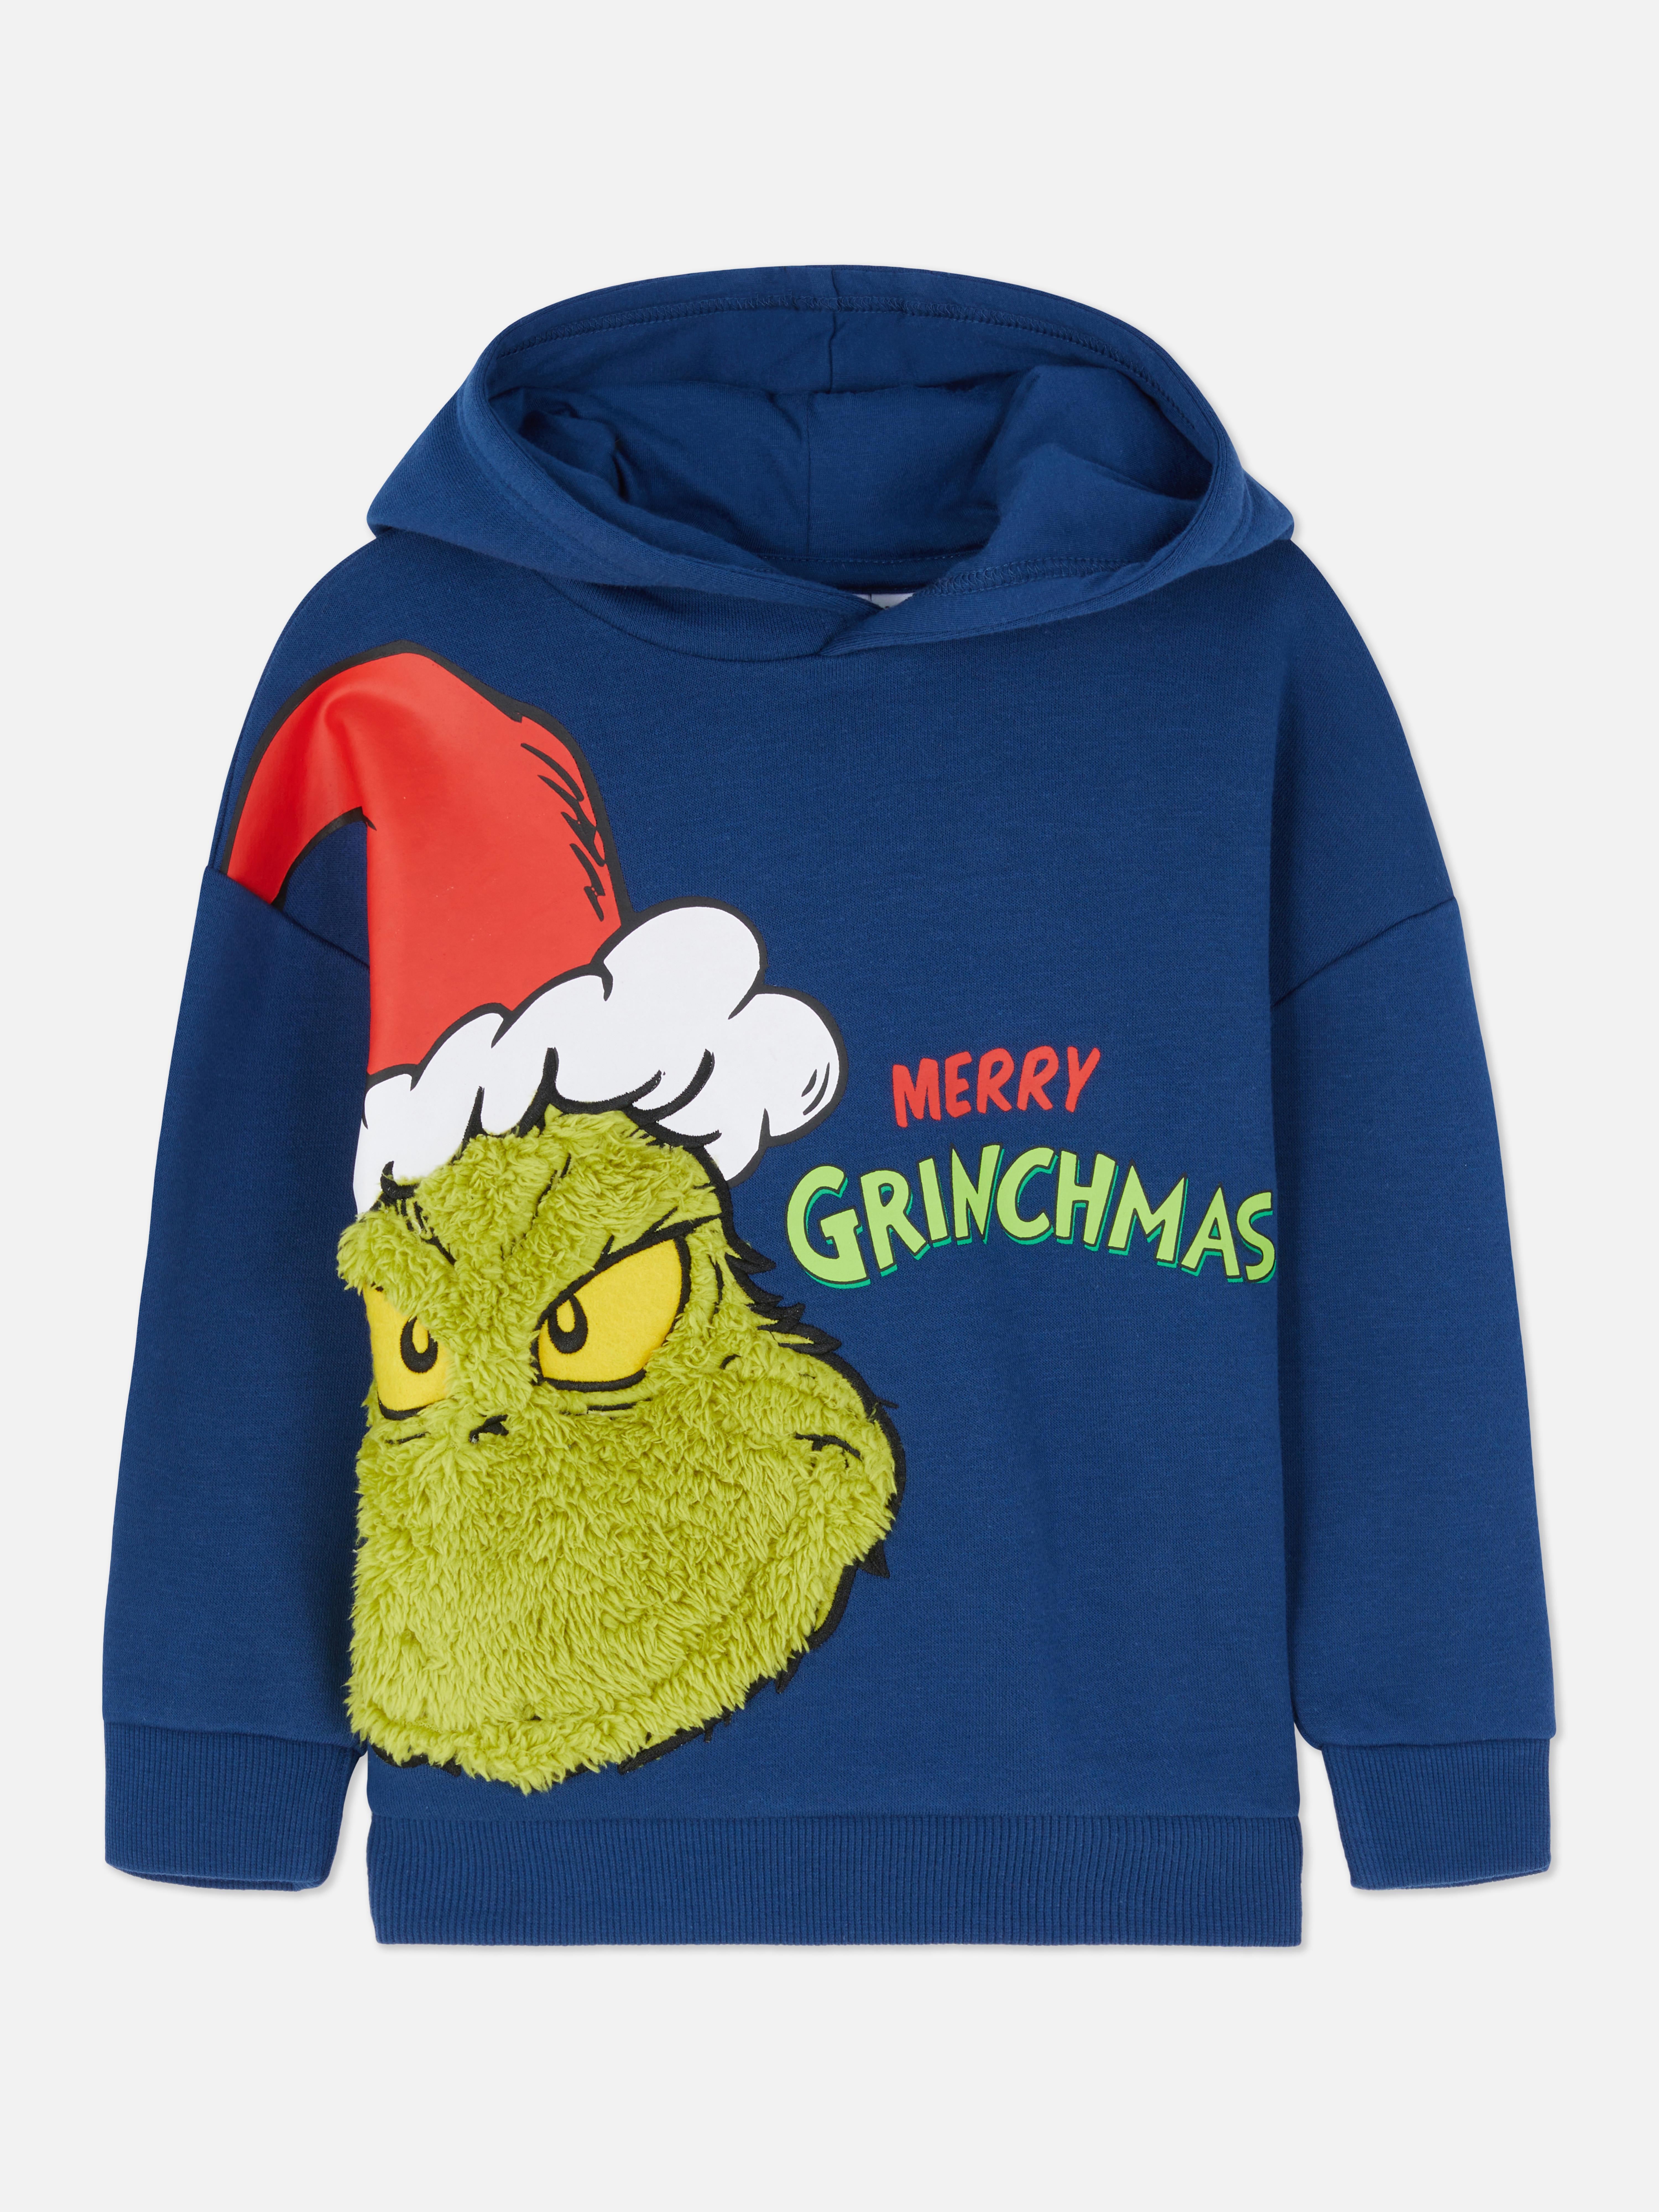 The Grinch Christmas Hoodie